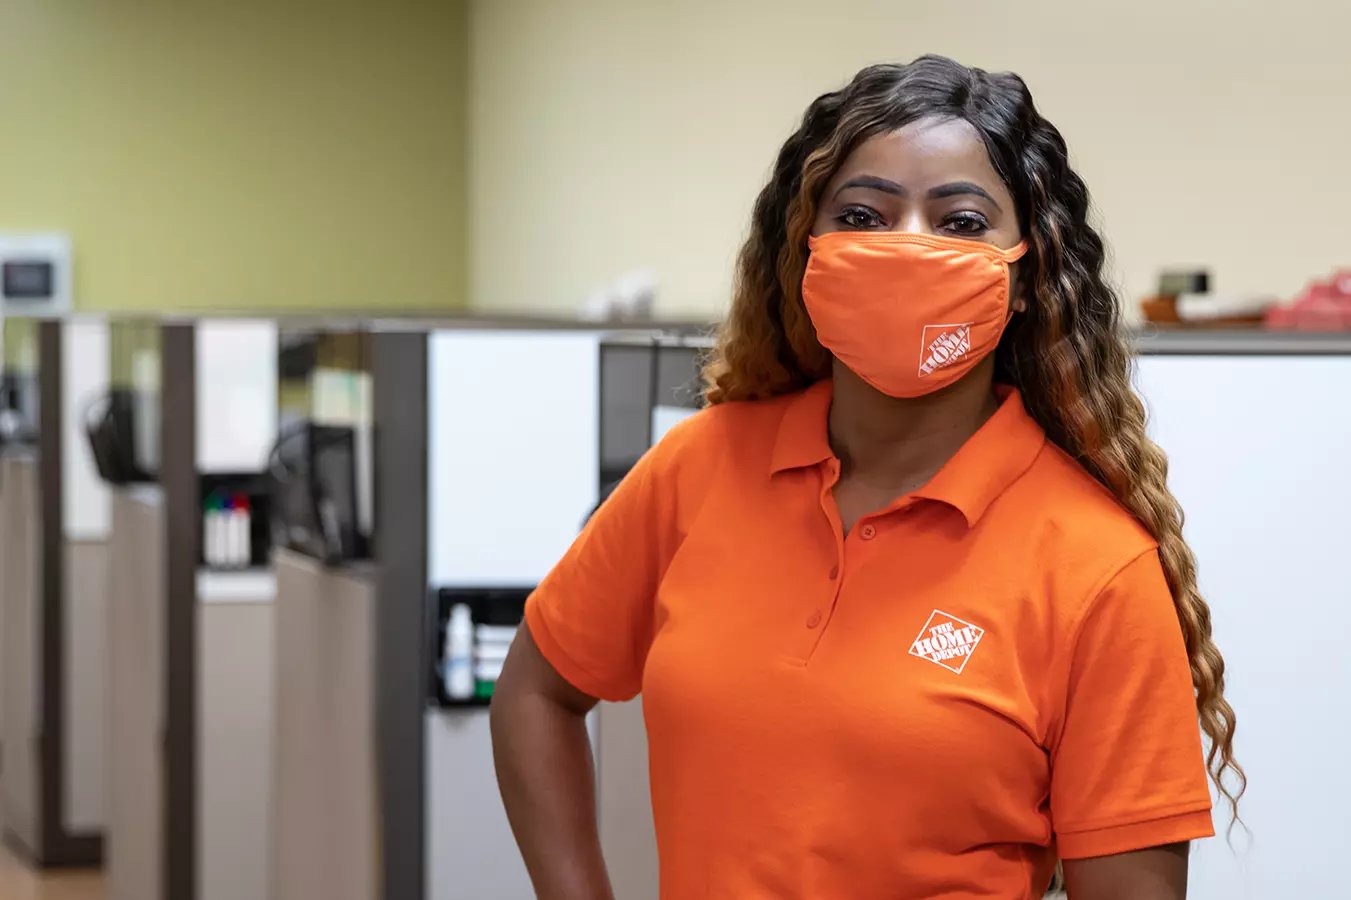 What is Home Depot looking for in an employee?